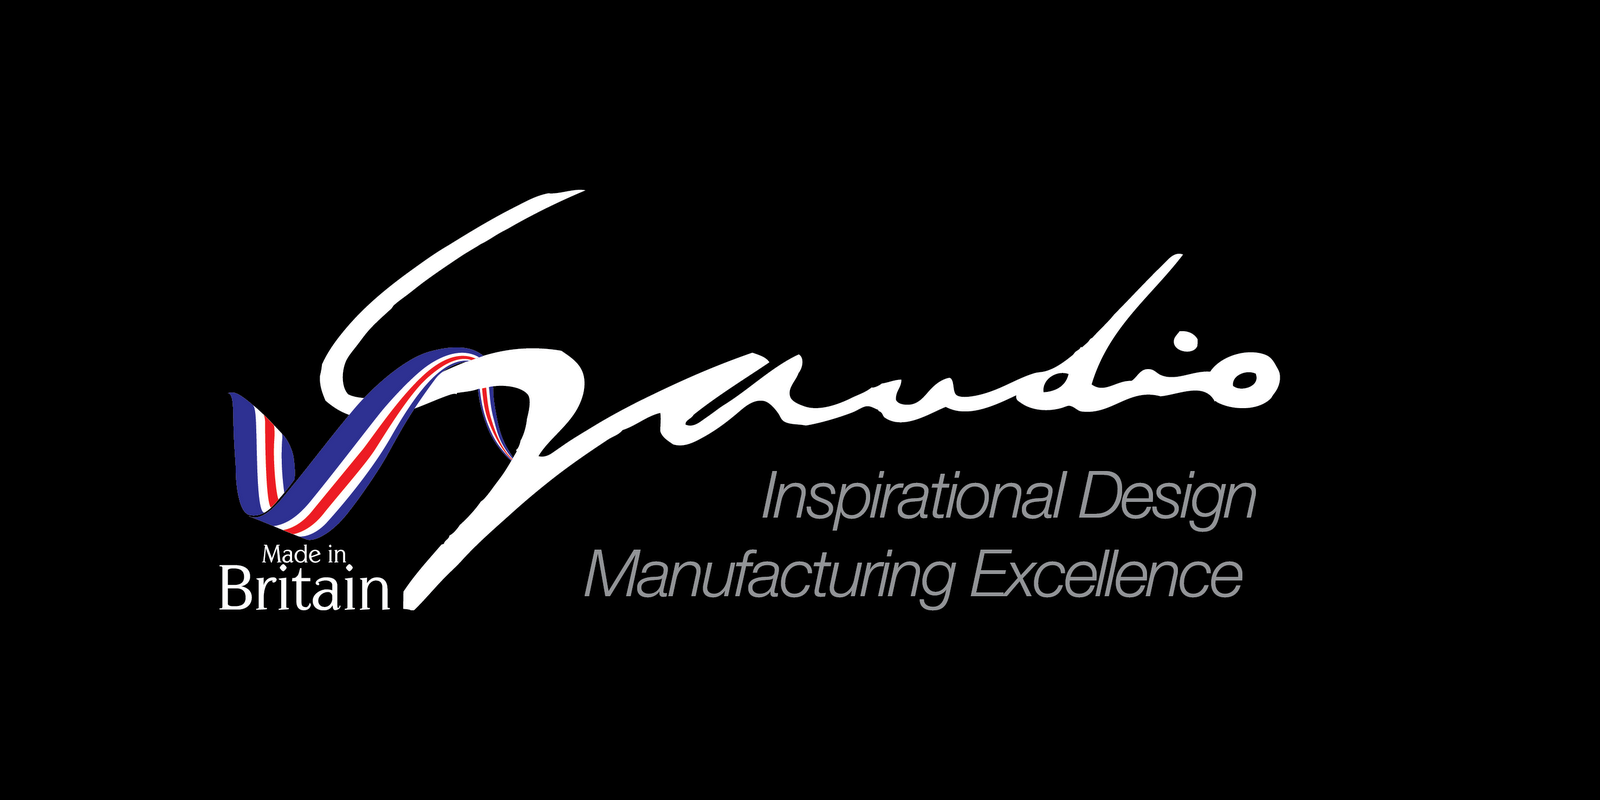 Gaudio Awards Blog: Made in Britain: Gaudio proudly flying the flag for ...